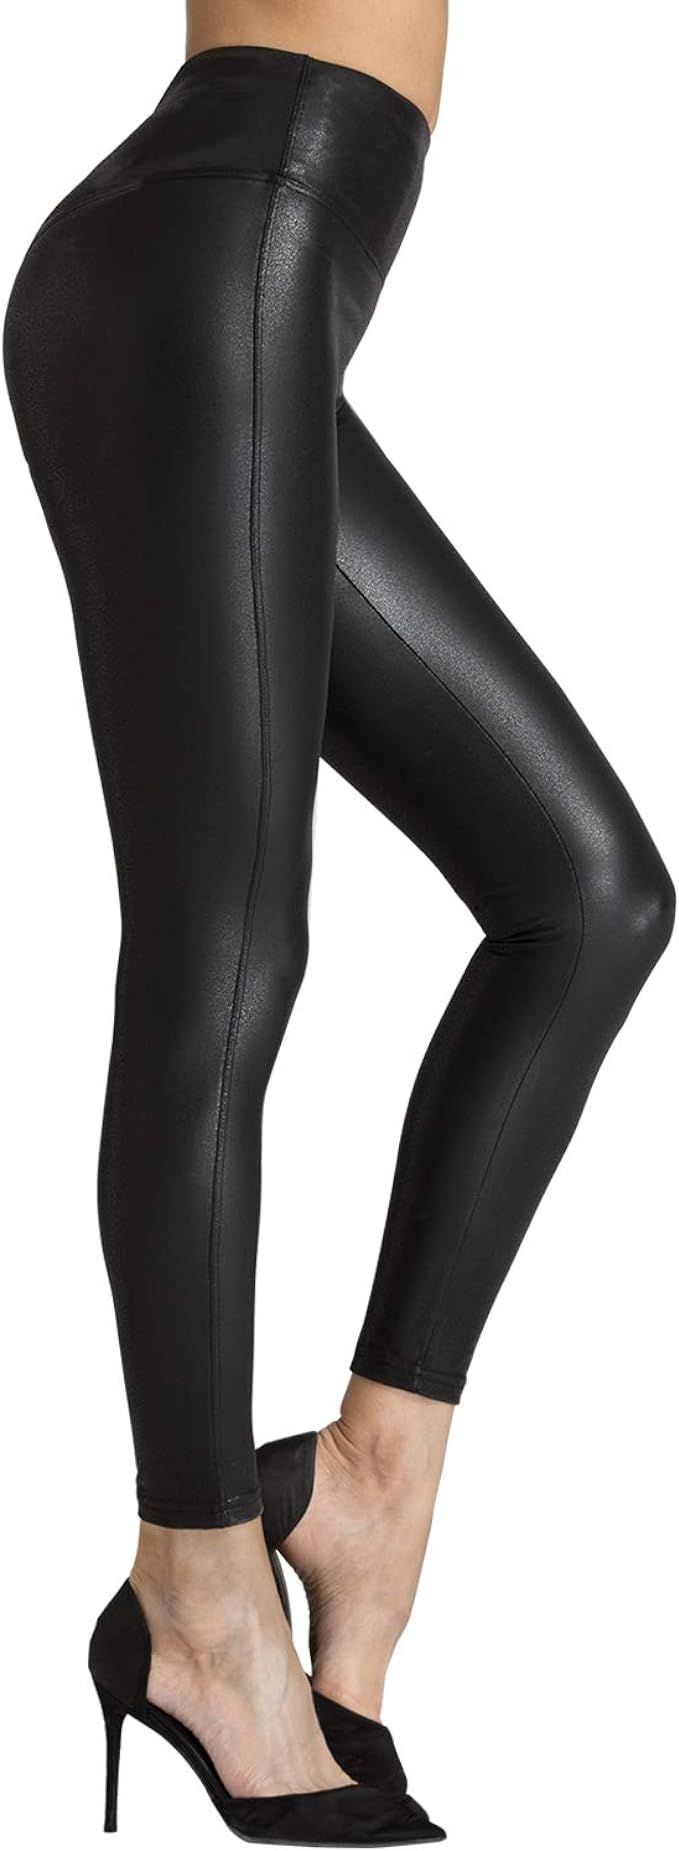 Booty GAL Faux Leather Leggings for Women High Waist Pants Black Elastic Tights (Sparkly Black, M... | Amazon (US)